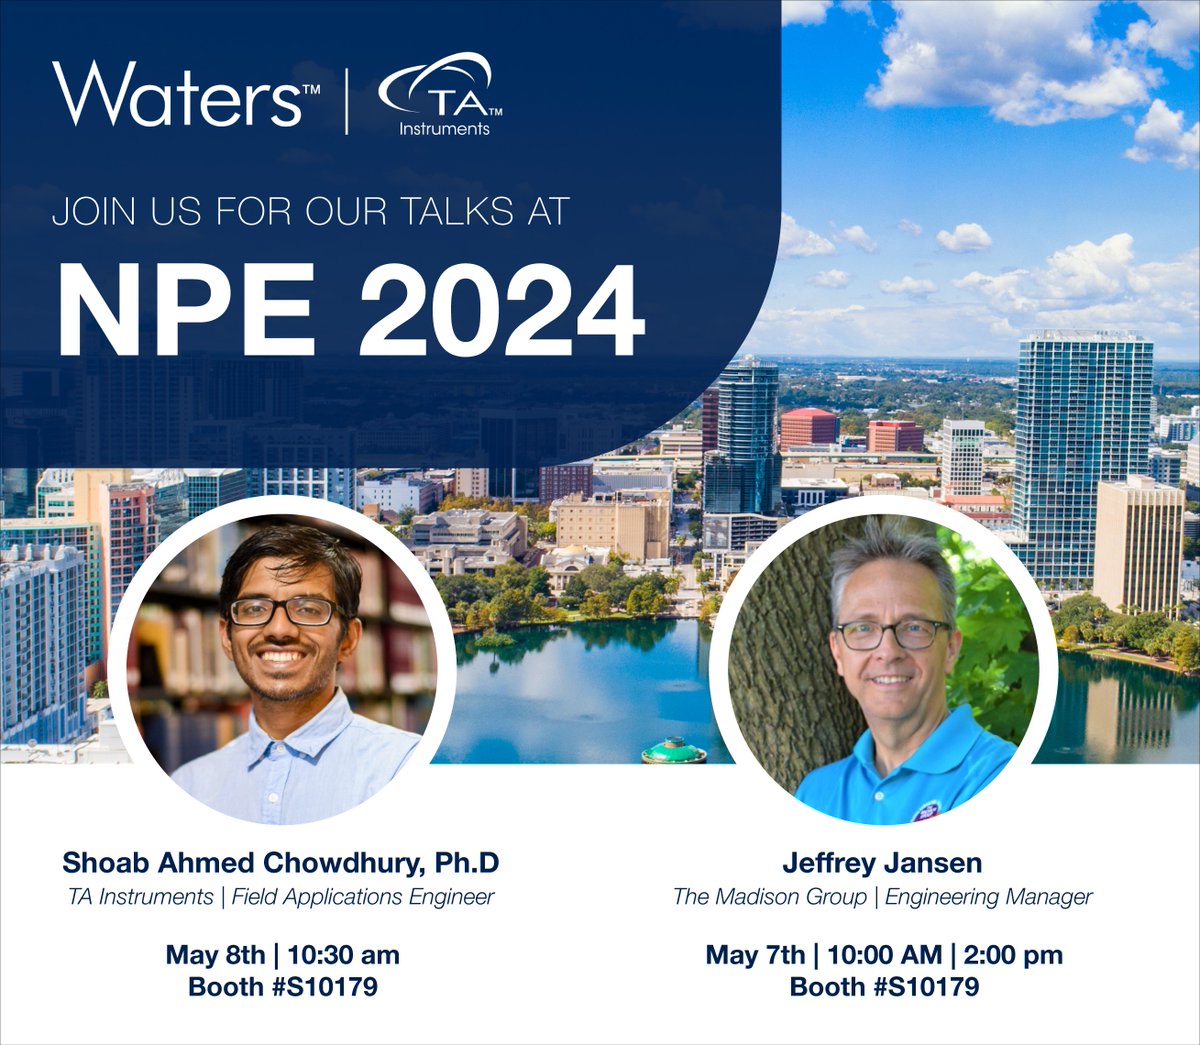 Good morning from @NPEplasticsshow! Stop by booth #S10179 to learn about cutting-edge polymer characterization techniques, and don't miss the 3 industry expert talks at our booth.
#NPE2024 #PlasticIndustry